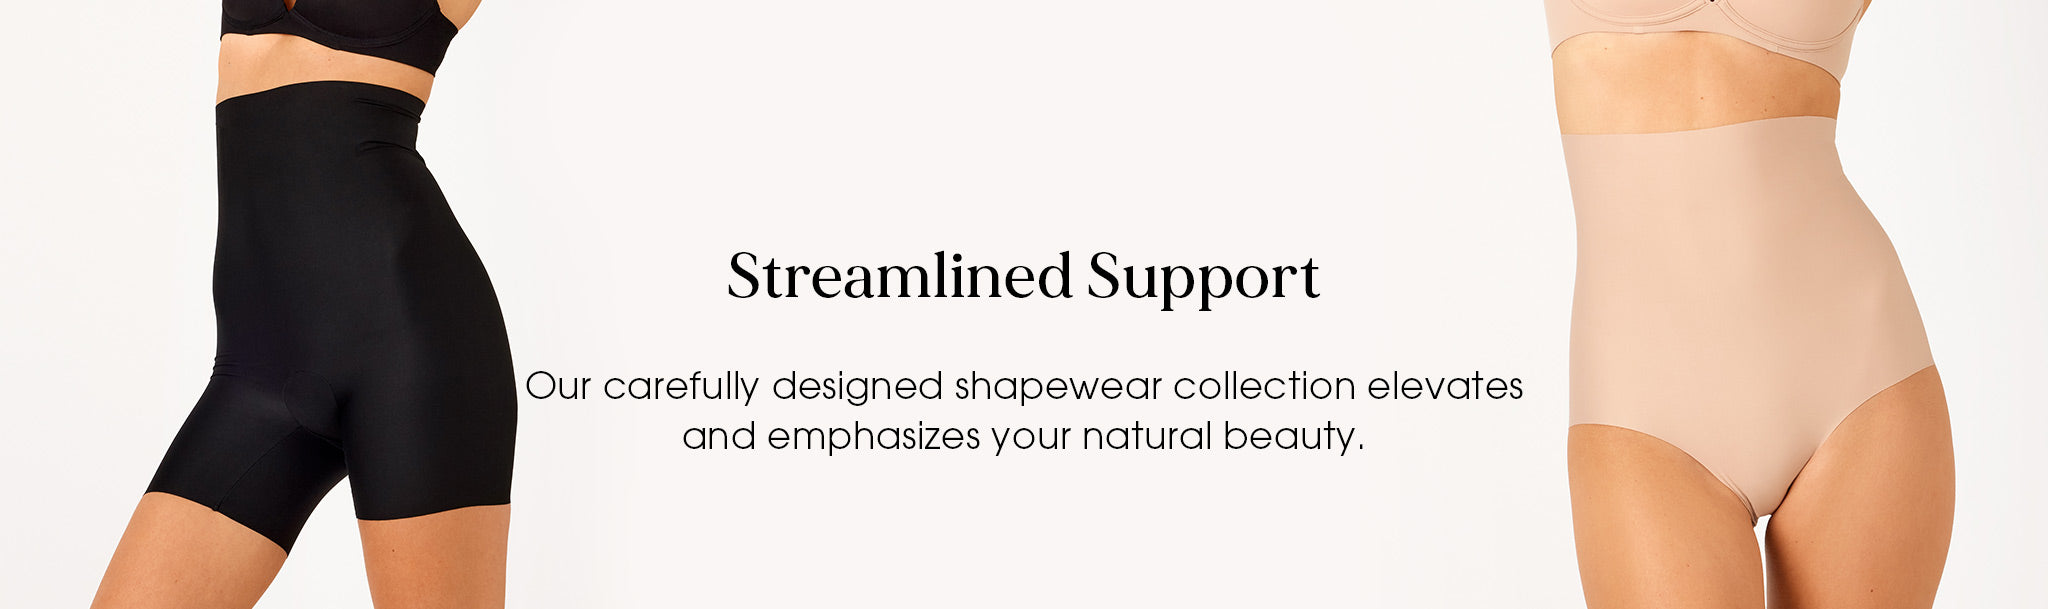 Streamlined Support  Our carefully designed shapewear collection elevates and emphasizes your natural beauty.